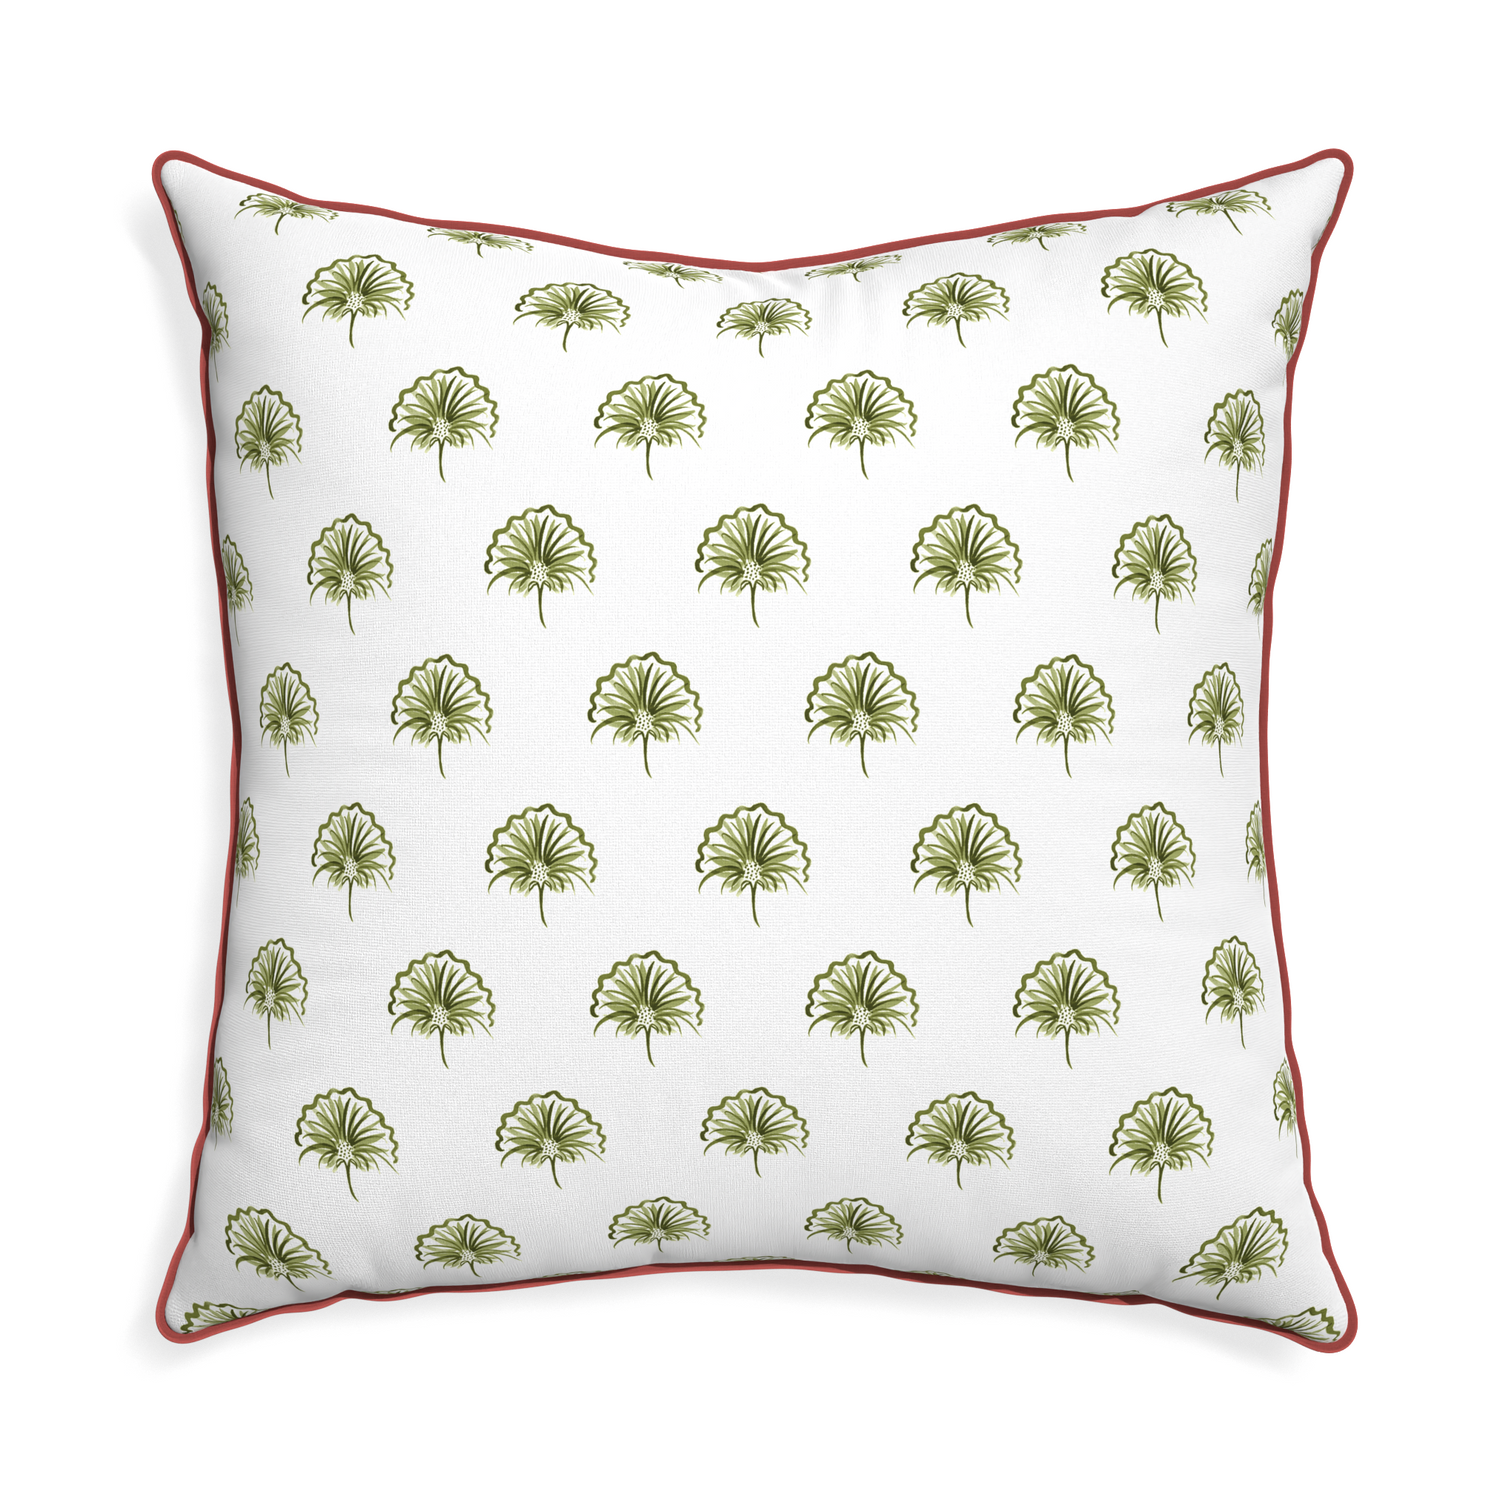 Euro-sham penelope moss custom pillow with c piping on white background